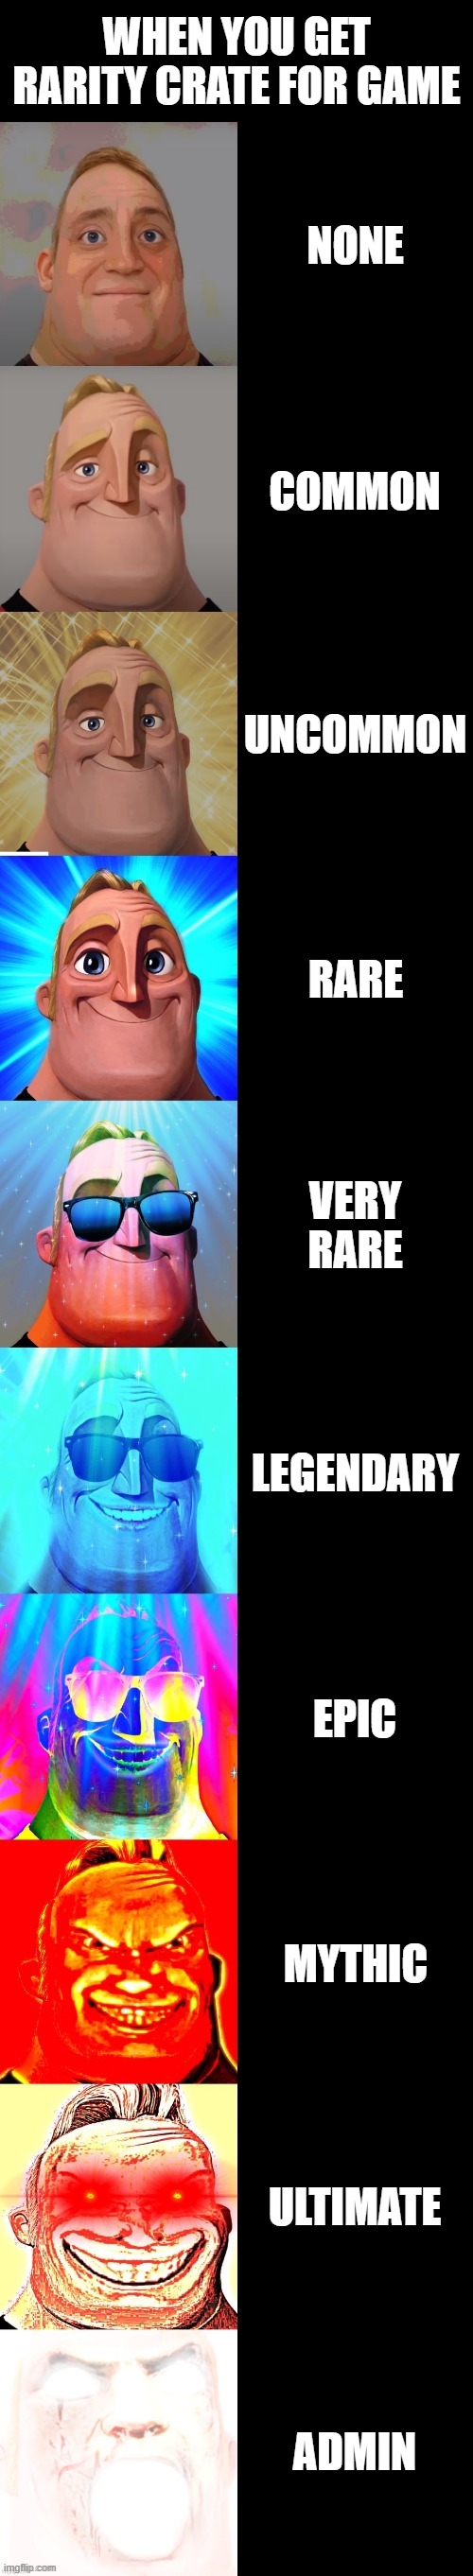 When you get rarity crate for game. | WHEN YOU GET RARITY CRATE FOR GAME; NONE; COMMON; UNCOMMON; RARE; VERY RARE; LEGENDARY; EPIC; MYTHIC; ULTIMATE; ADMIN | image tagged in mr incredible becoming canny | made w/ Imgflip meme maker